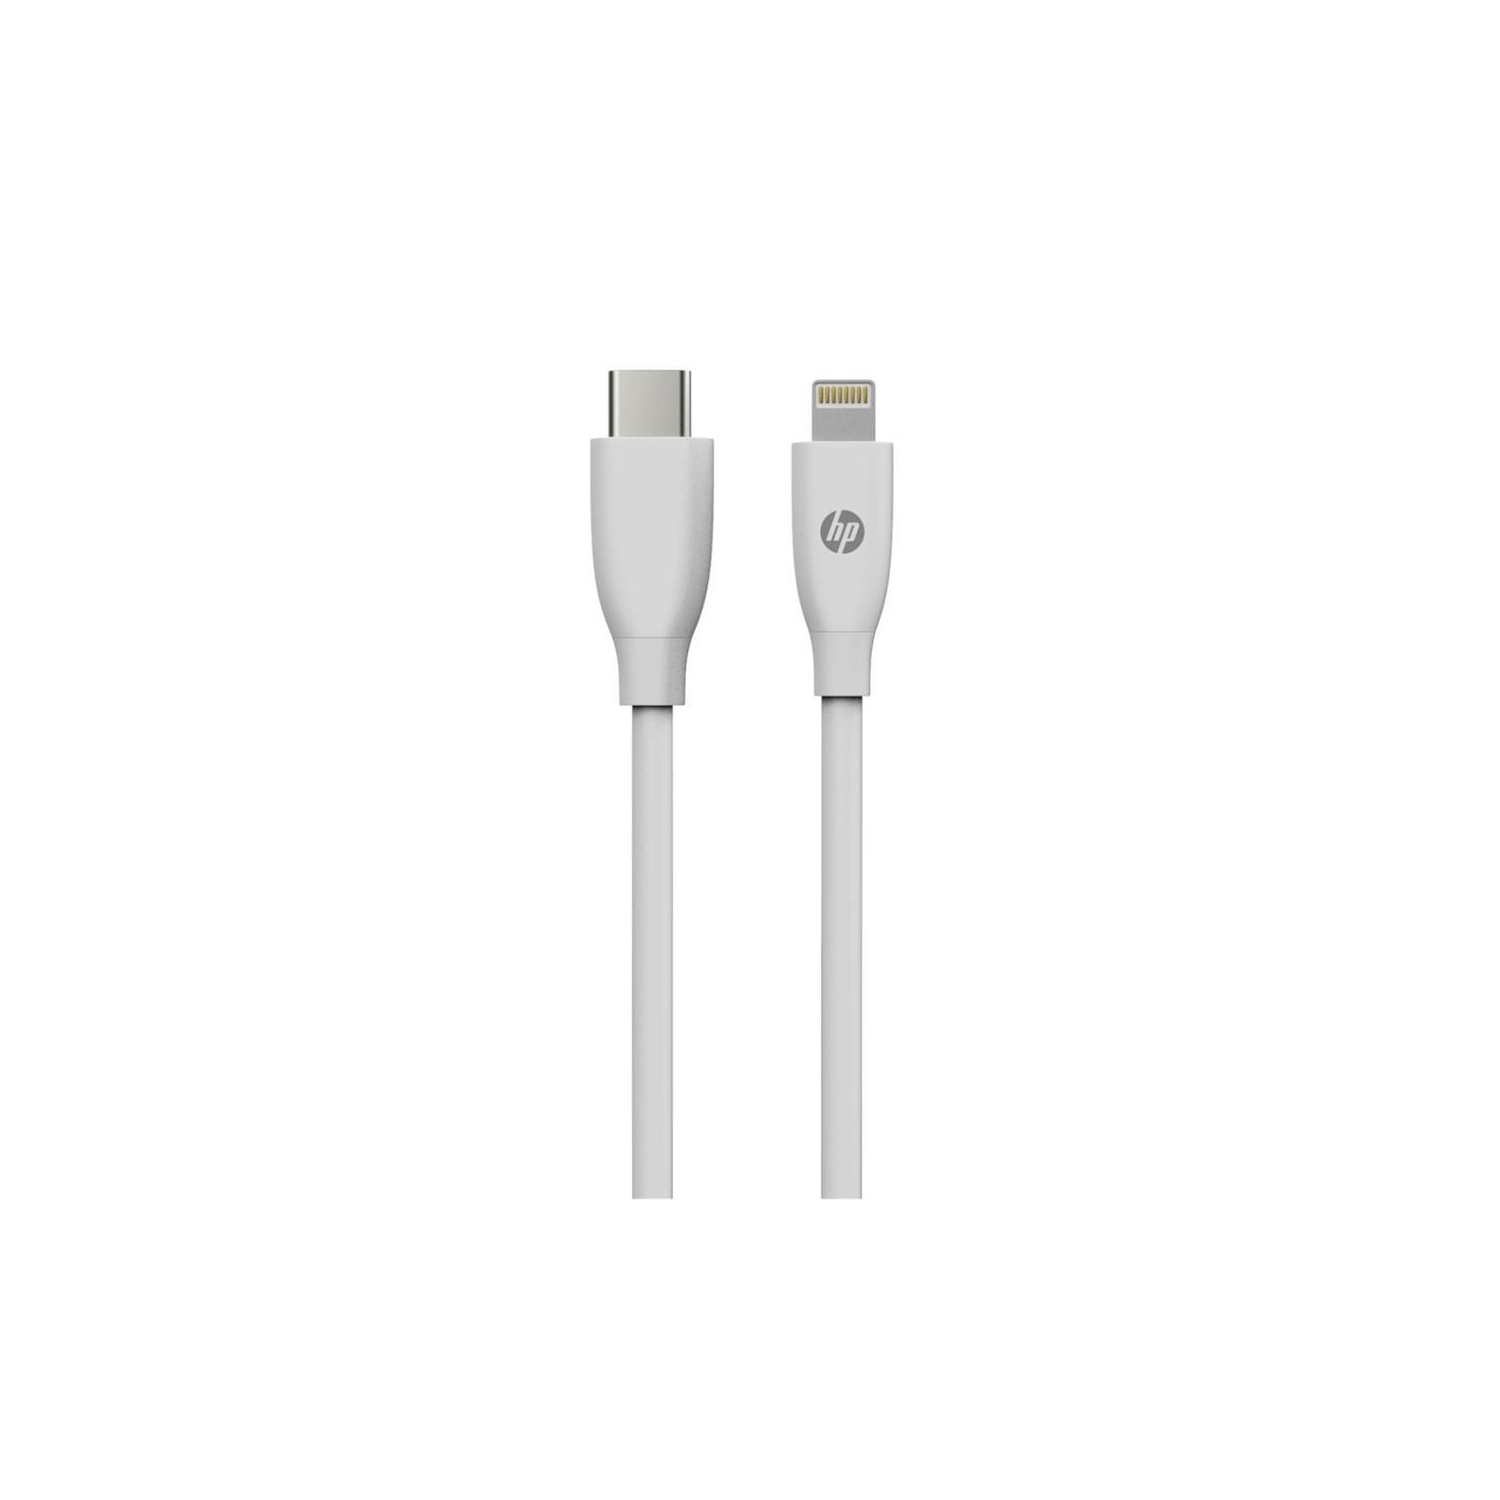 HP - USB C to Lightning Cable, Charge and Sync, 1 Meter Length, White